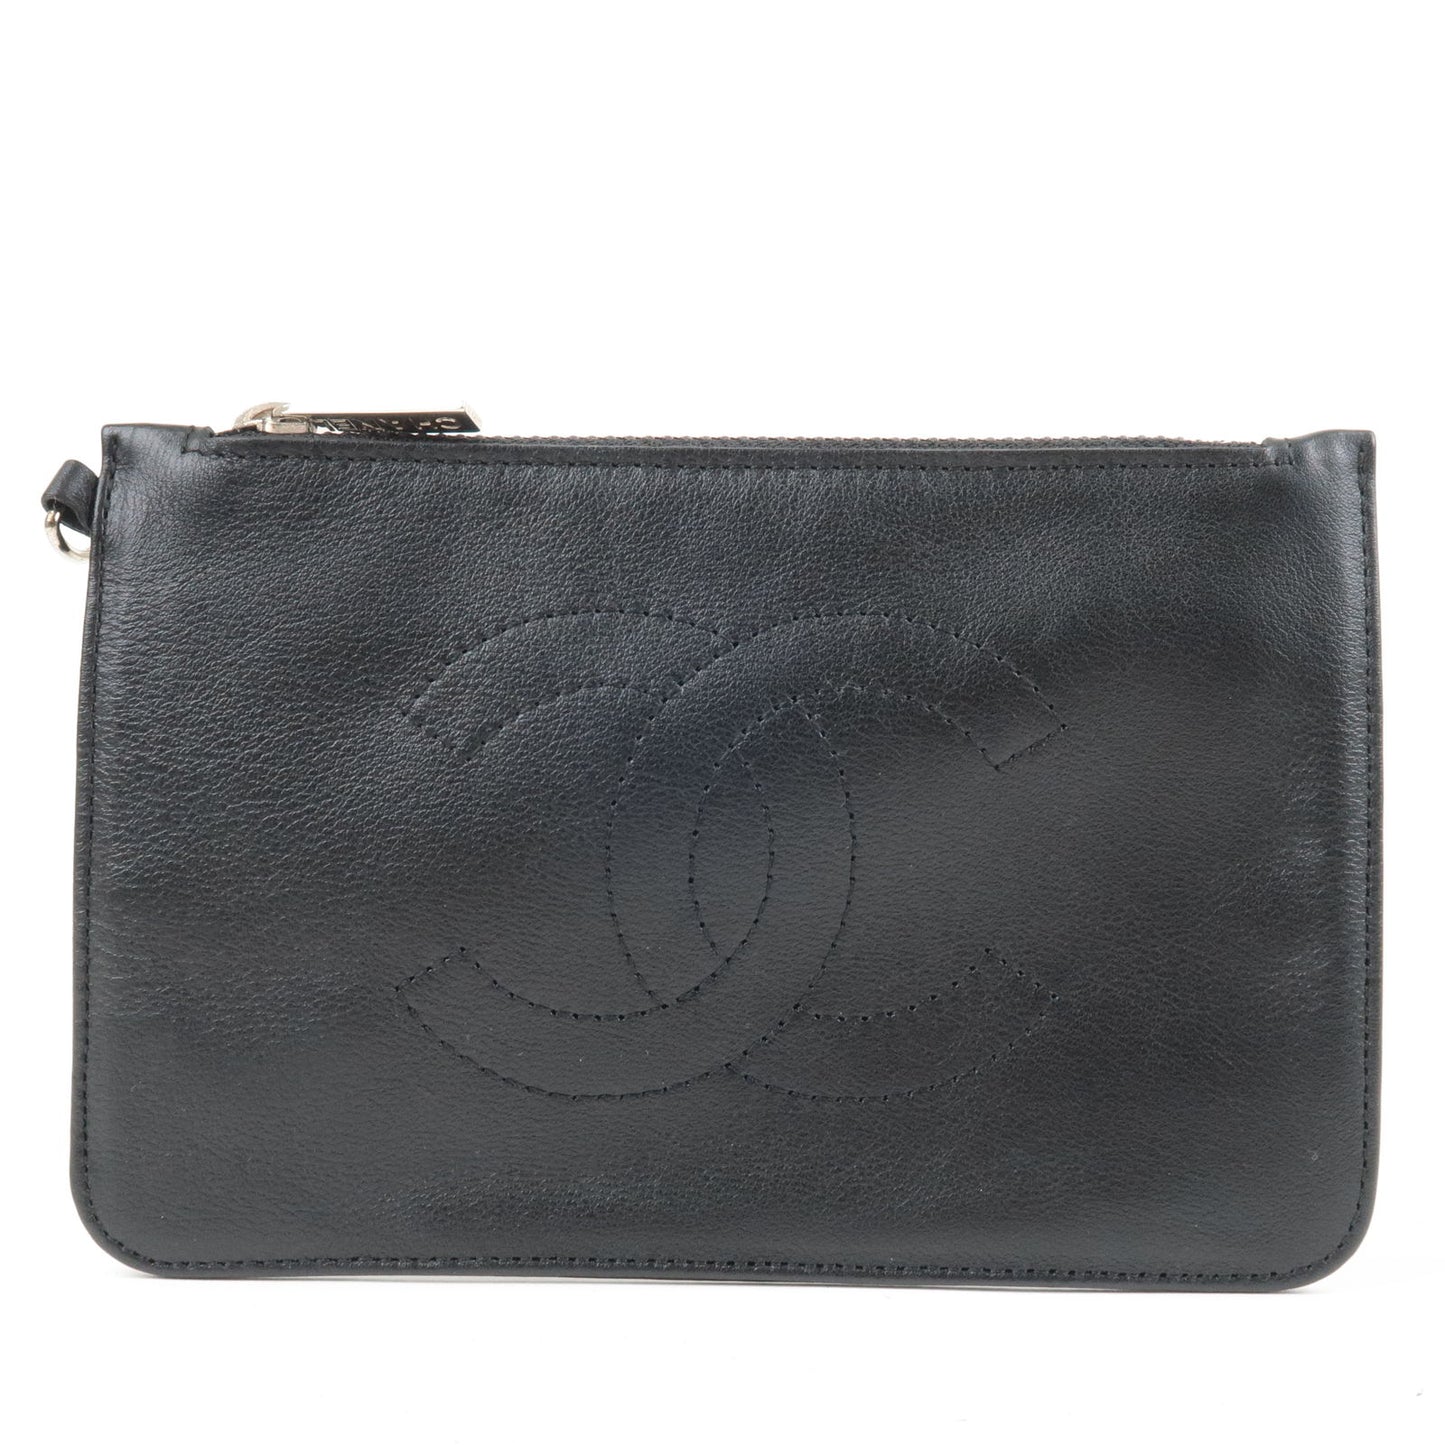 CHANEL Coco Mark Leather Cosmetic Small Pouch Black